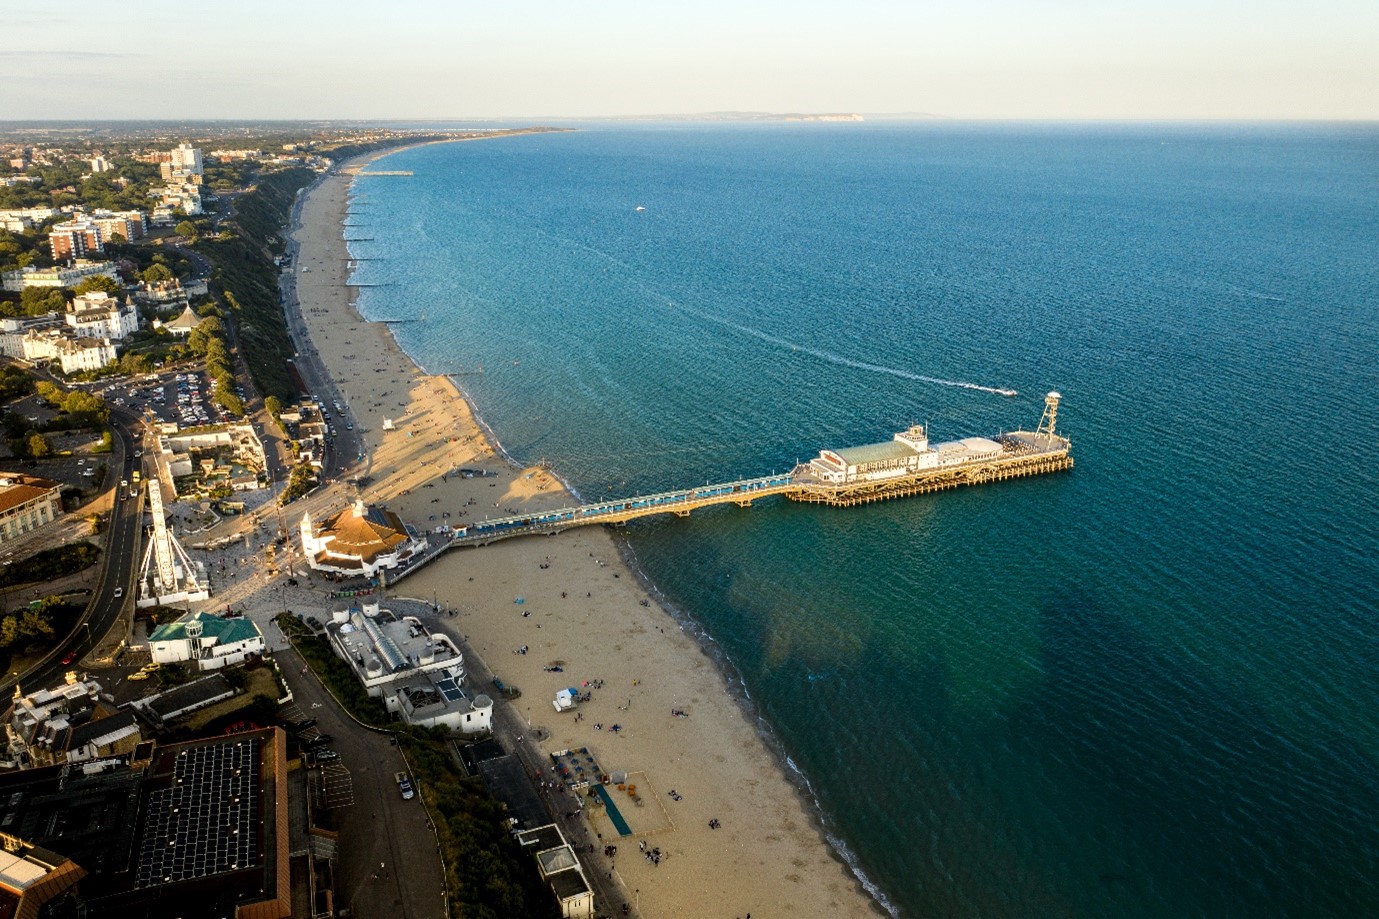 Bournemouth Beach from a drone point of view with the pier and sea